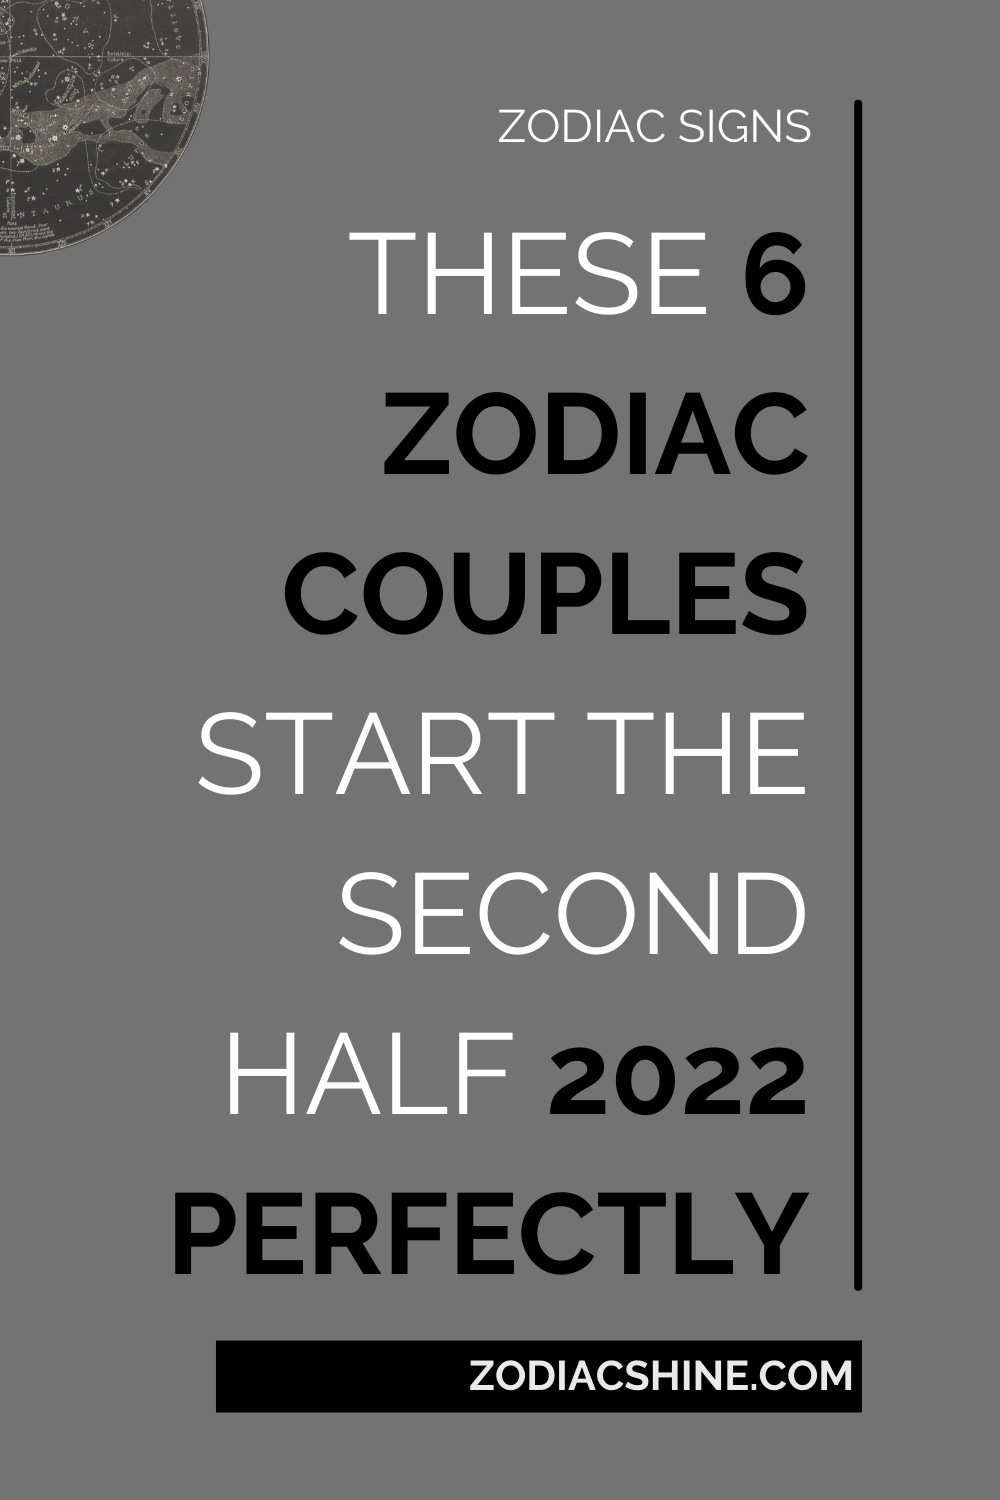 These 6 Zodiac Couples Start The Second Half 2022 Perfectly